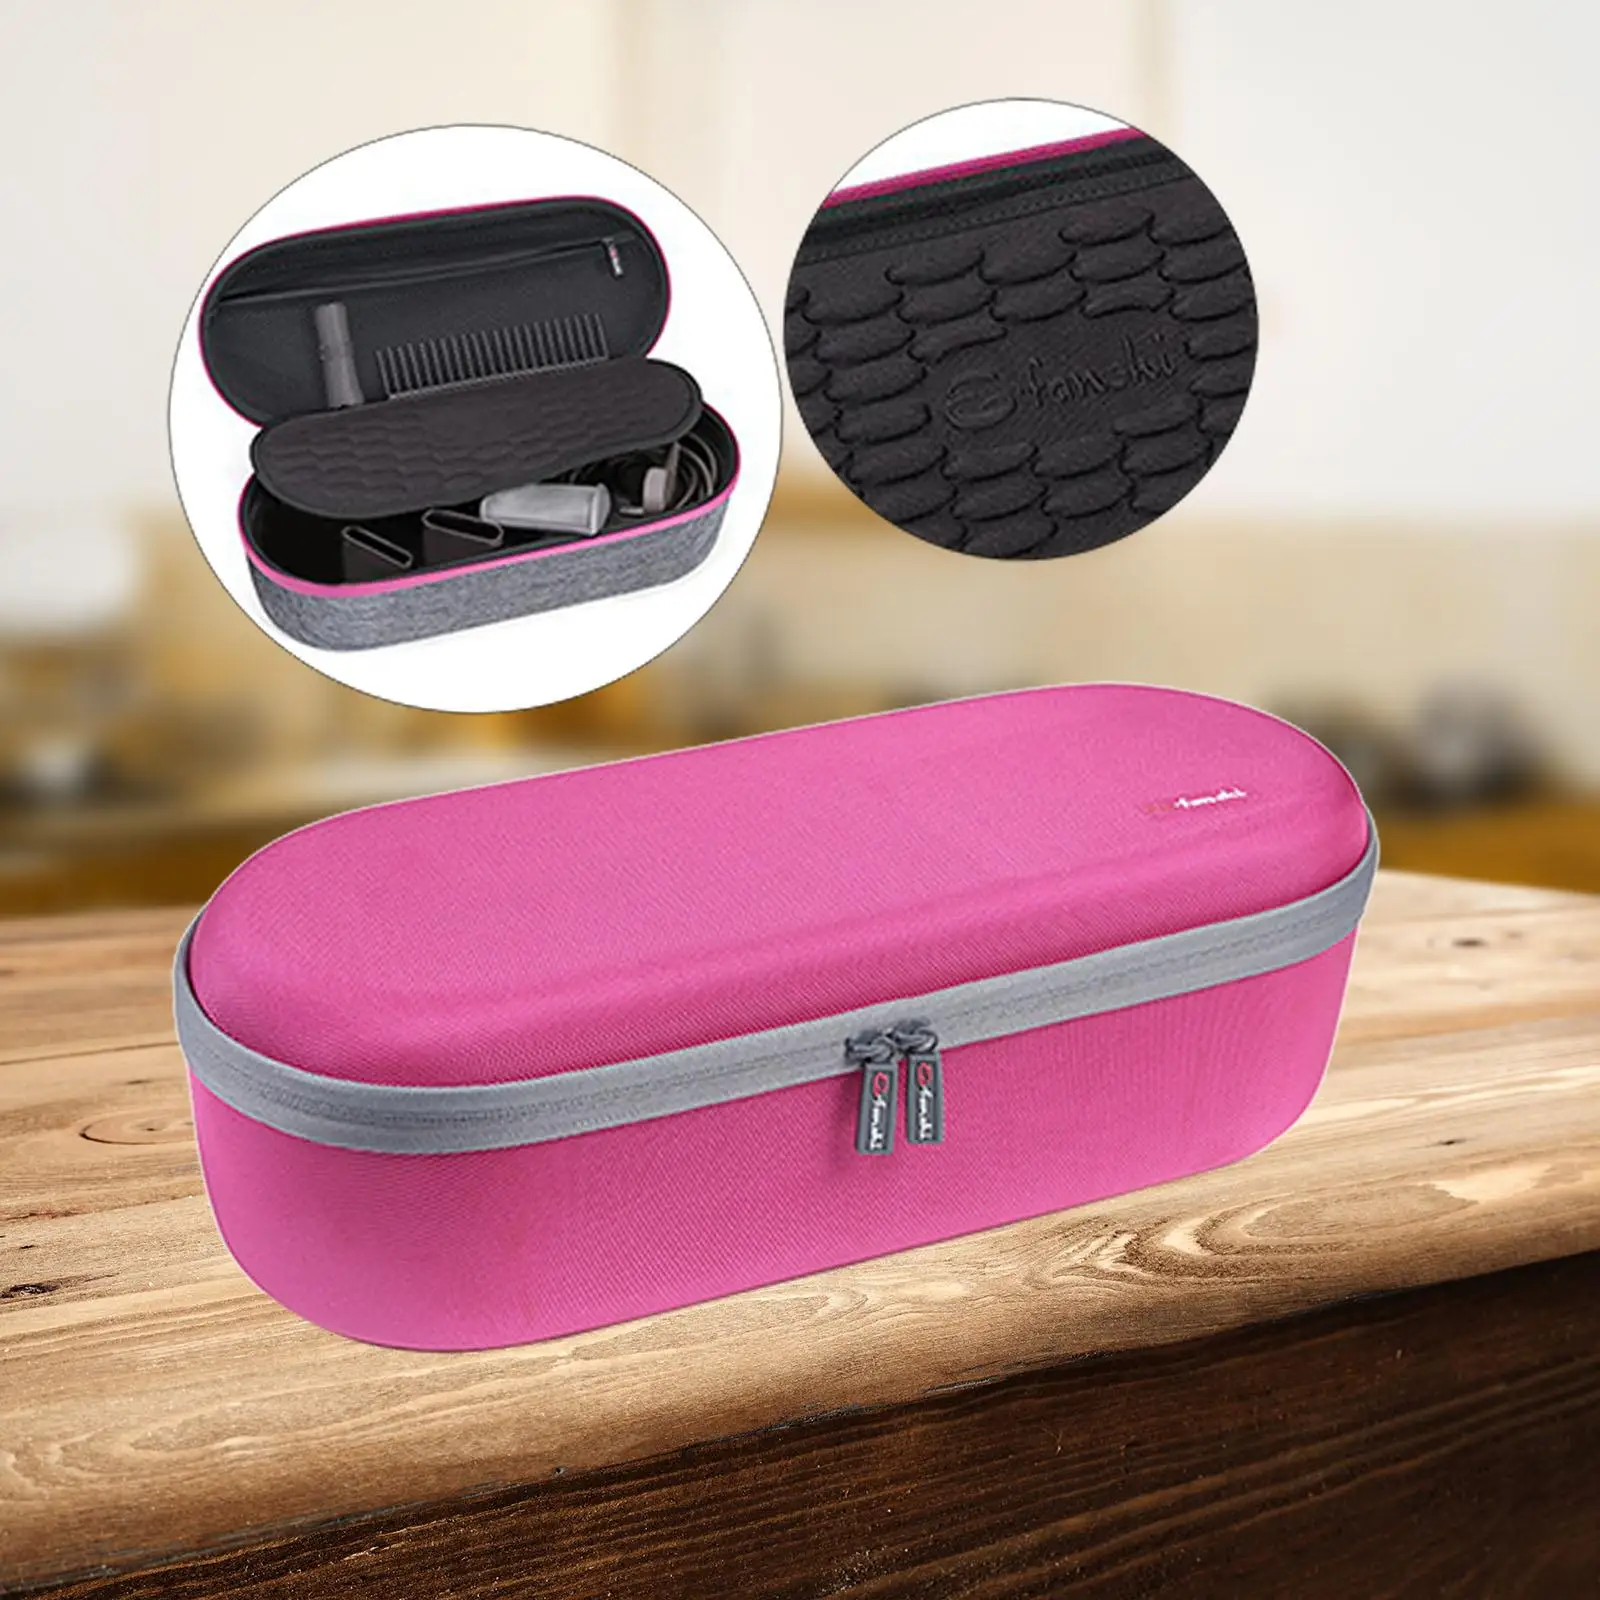 Hair Dryer Case for Hair Dryer, Extra Storage Space for Accessories ? Travel Carrier Case Bag